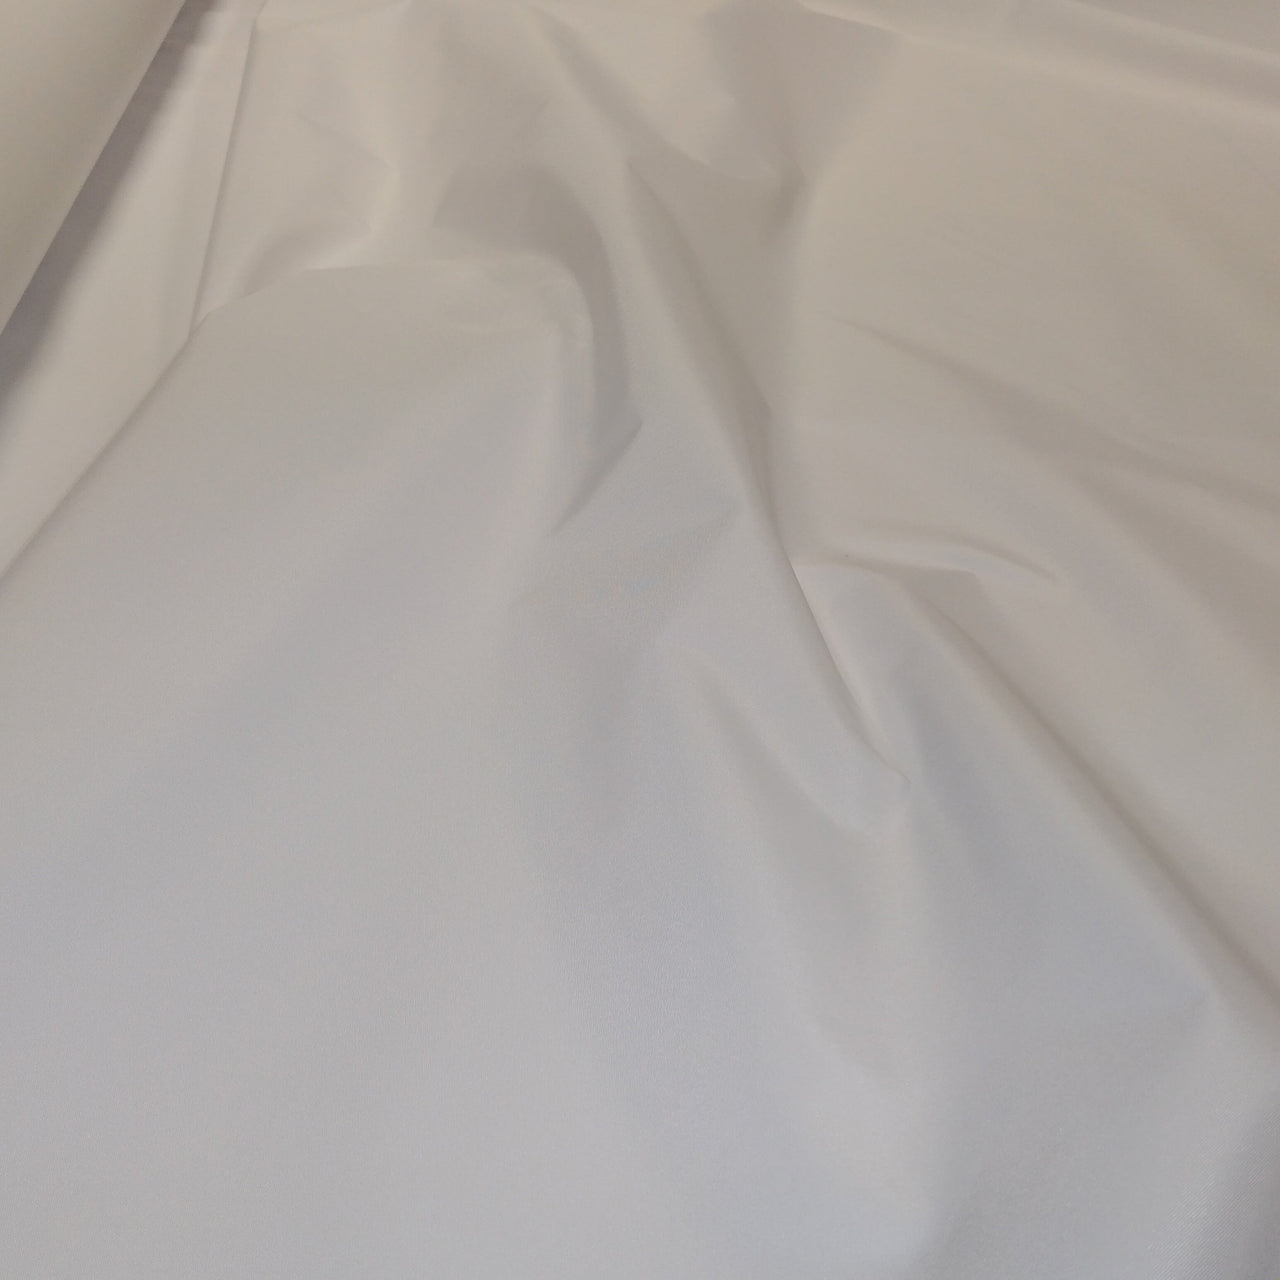 Sublimation Fabric - PU coated water resistant - Prepared for Print on Both Sides of Fabric